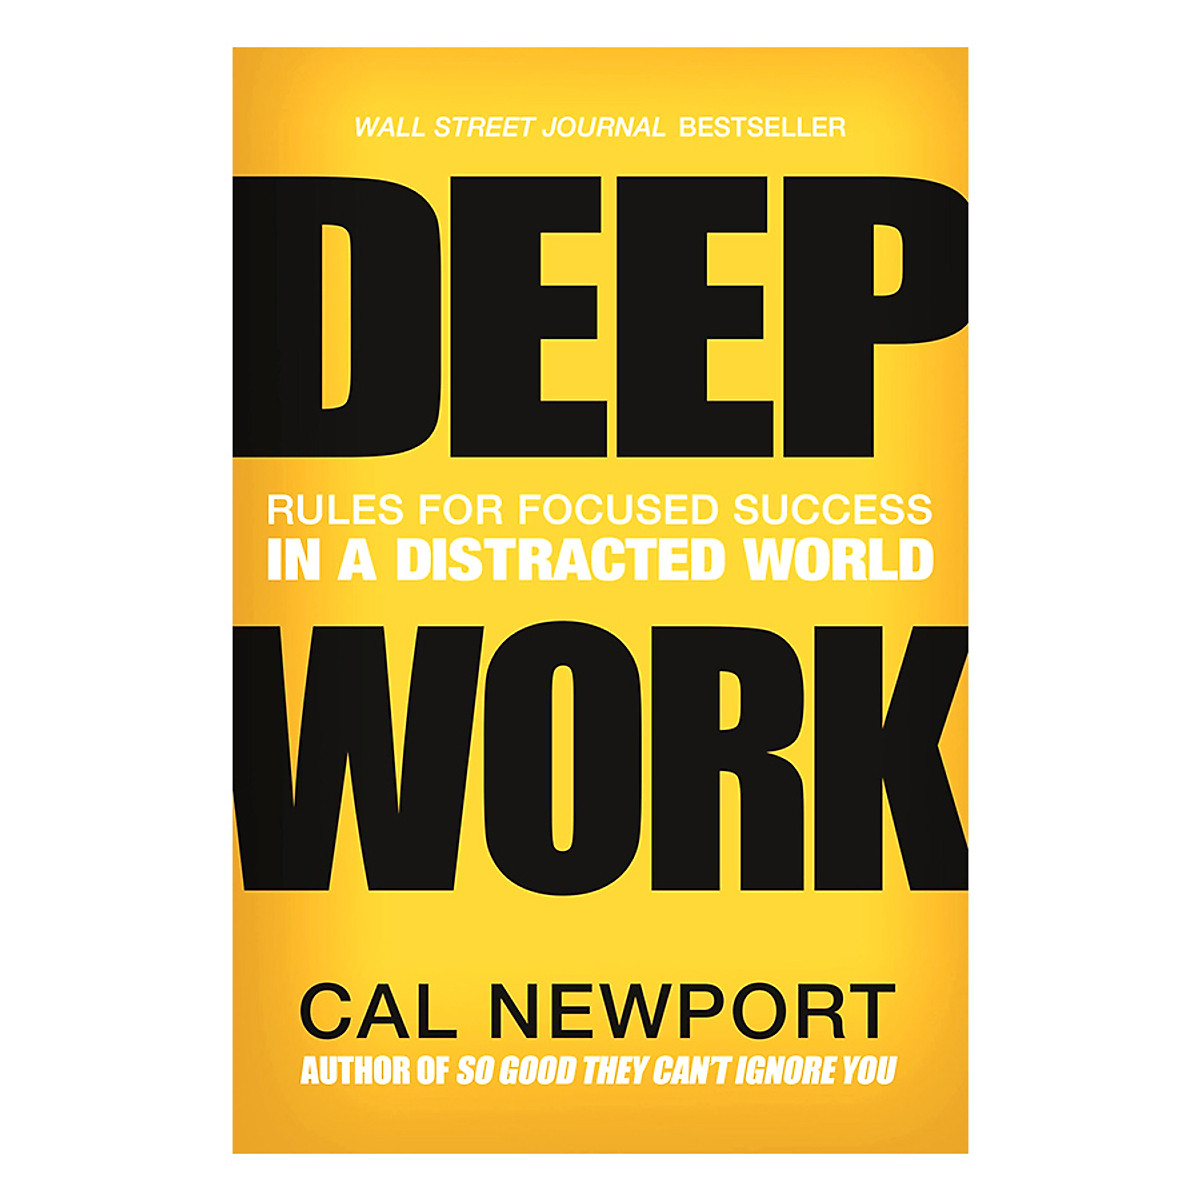 Deep Work: Rules For Focused Success In A Distracted World